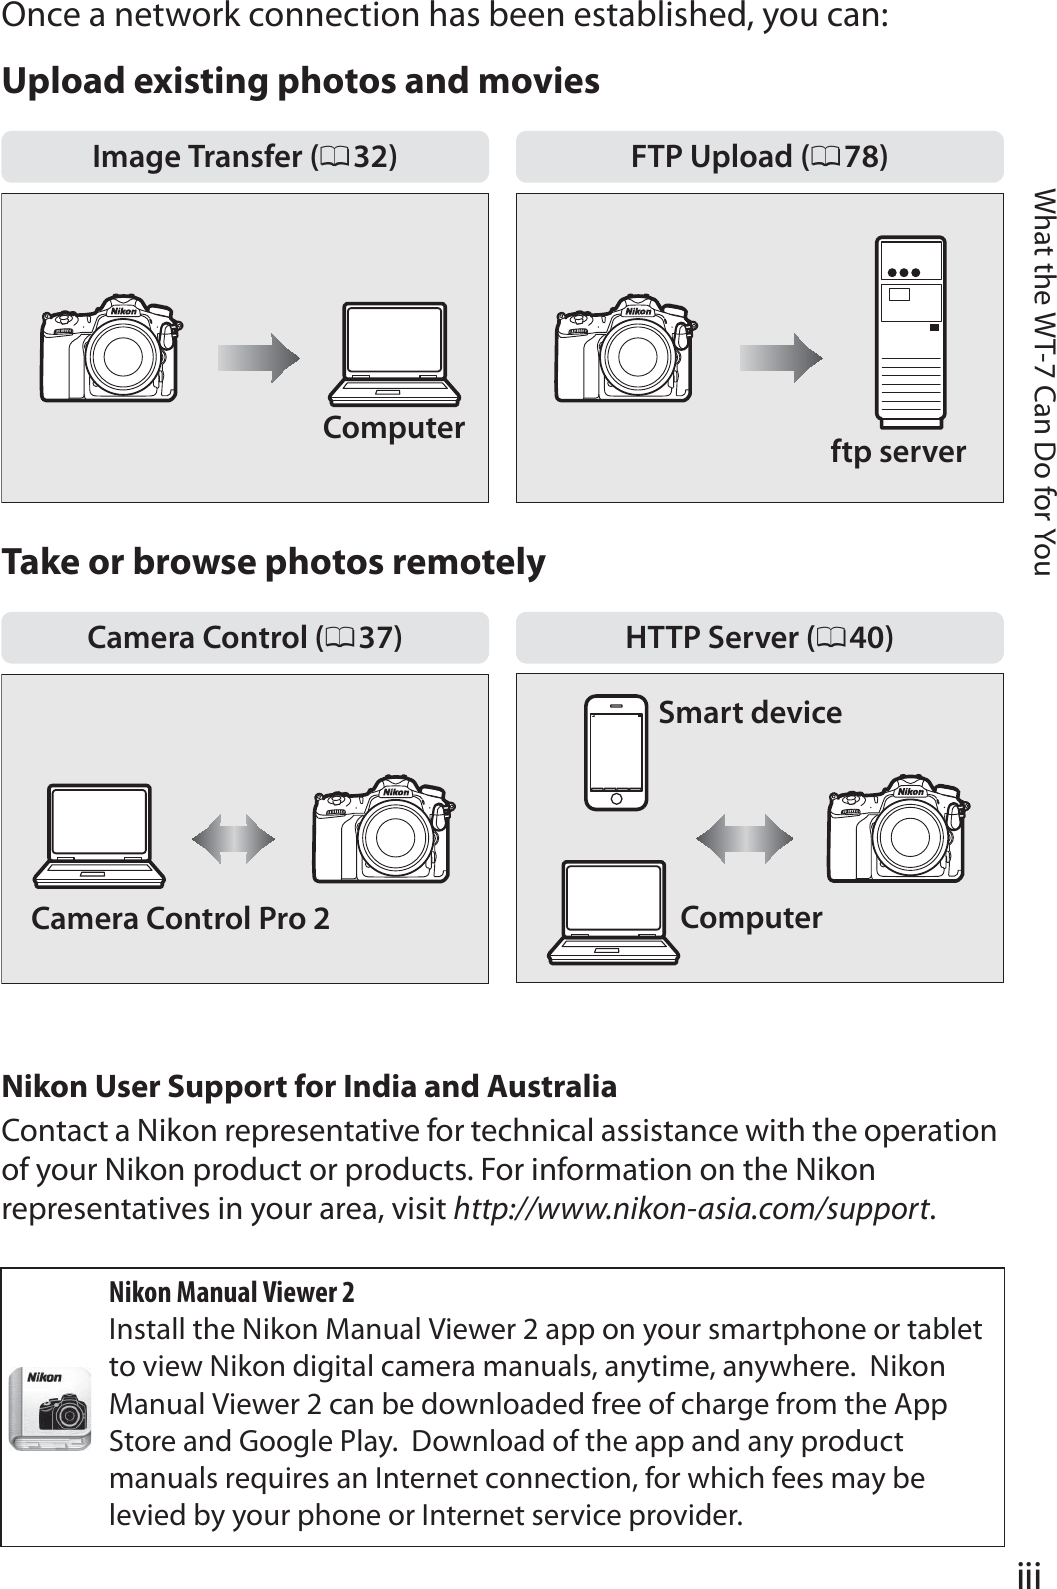 iiiWhat the WT-7 Can Do for YouOnce a network connection has been established, you can:Upload existing photos and moviesTake or browse photos remotelyNikon User Support for India and AustraliaContact a Nikon representative for technical assistance with the operation of your Nikon product or products. For information on the Nikon representatives in your area, visit http://www.nikon-asia.com/support.Nikon Manual Viewer 2Install the Nikon Manual Viewer 2 app on your smartphone or tablet to view Nikon digital camera manuals, anytime, anywhere. Nikon Manual Viewer 2 can be downloaded free of charge from the App Store and Google Play. Download of the app and any product manuals requires an Internet connection, for which fees may be levied by your phone or Internet service provider.Image Transfer (032) FTP Upload (078)Computer ftp serverCamera Control (037) HTTP Server (040)Camera Control Pro 2Smart deviceComputer